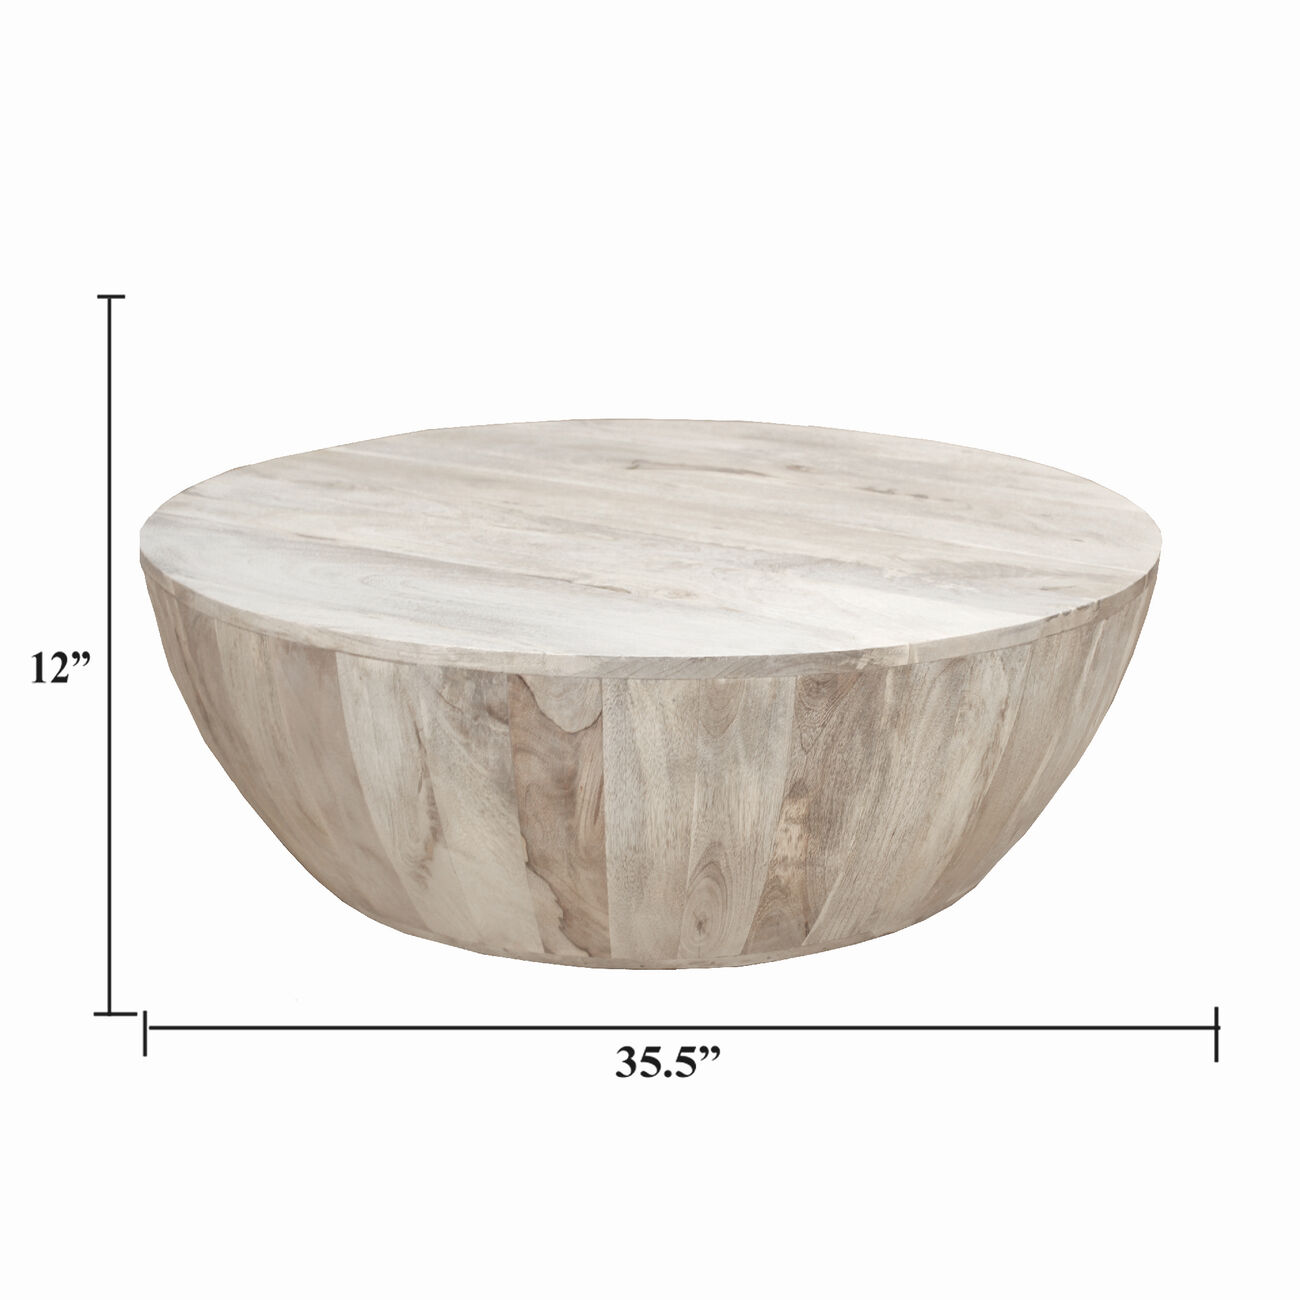 Distressed Mango Wood Coffee Table in Round Shape, Washed Light Brown